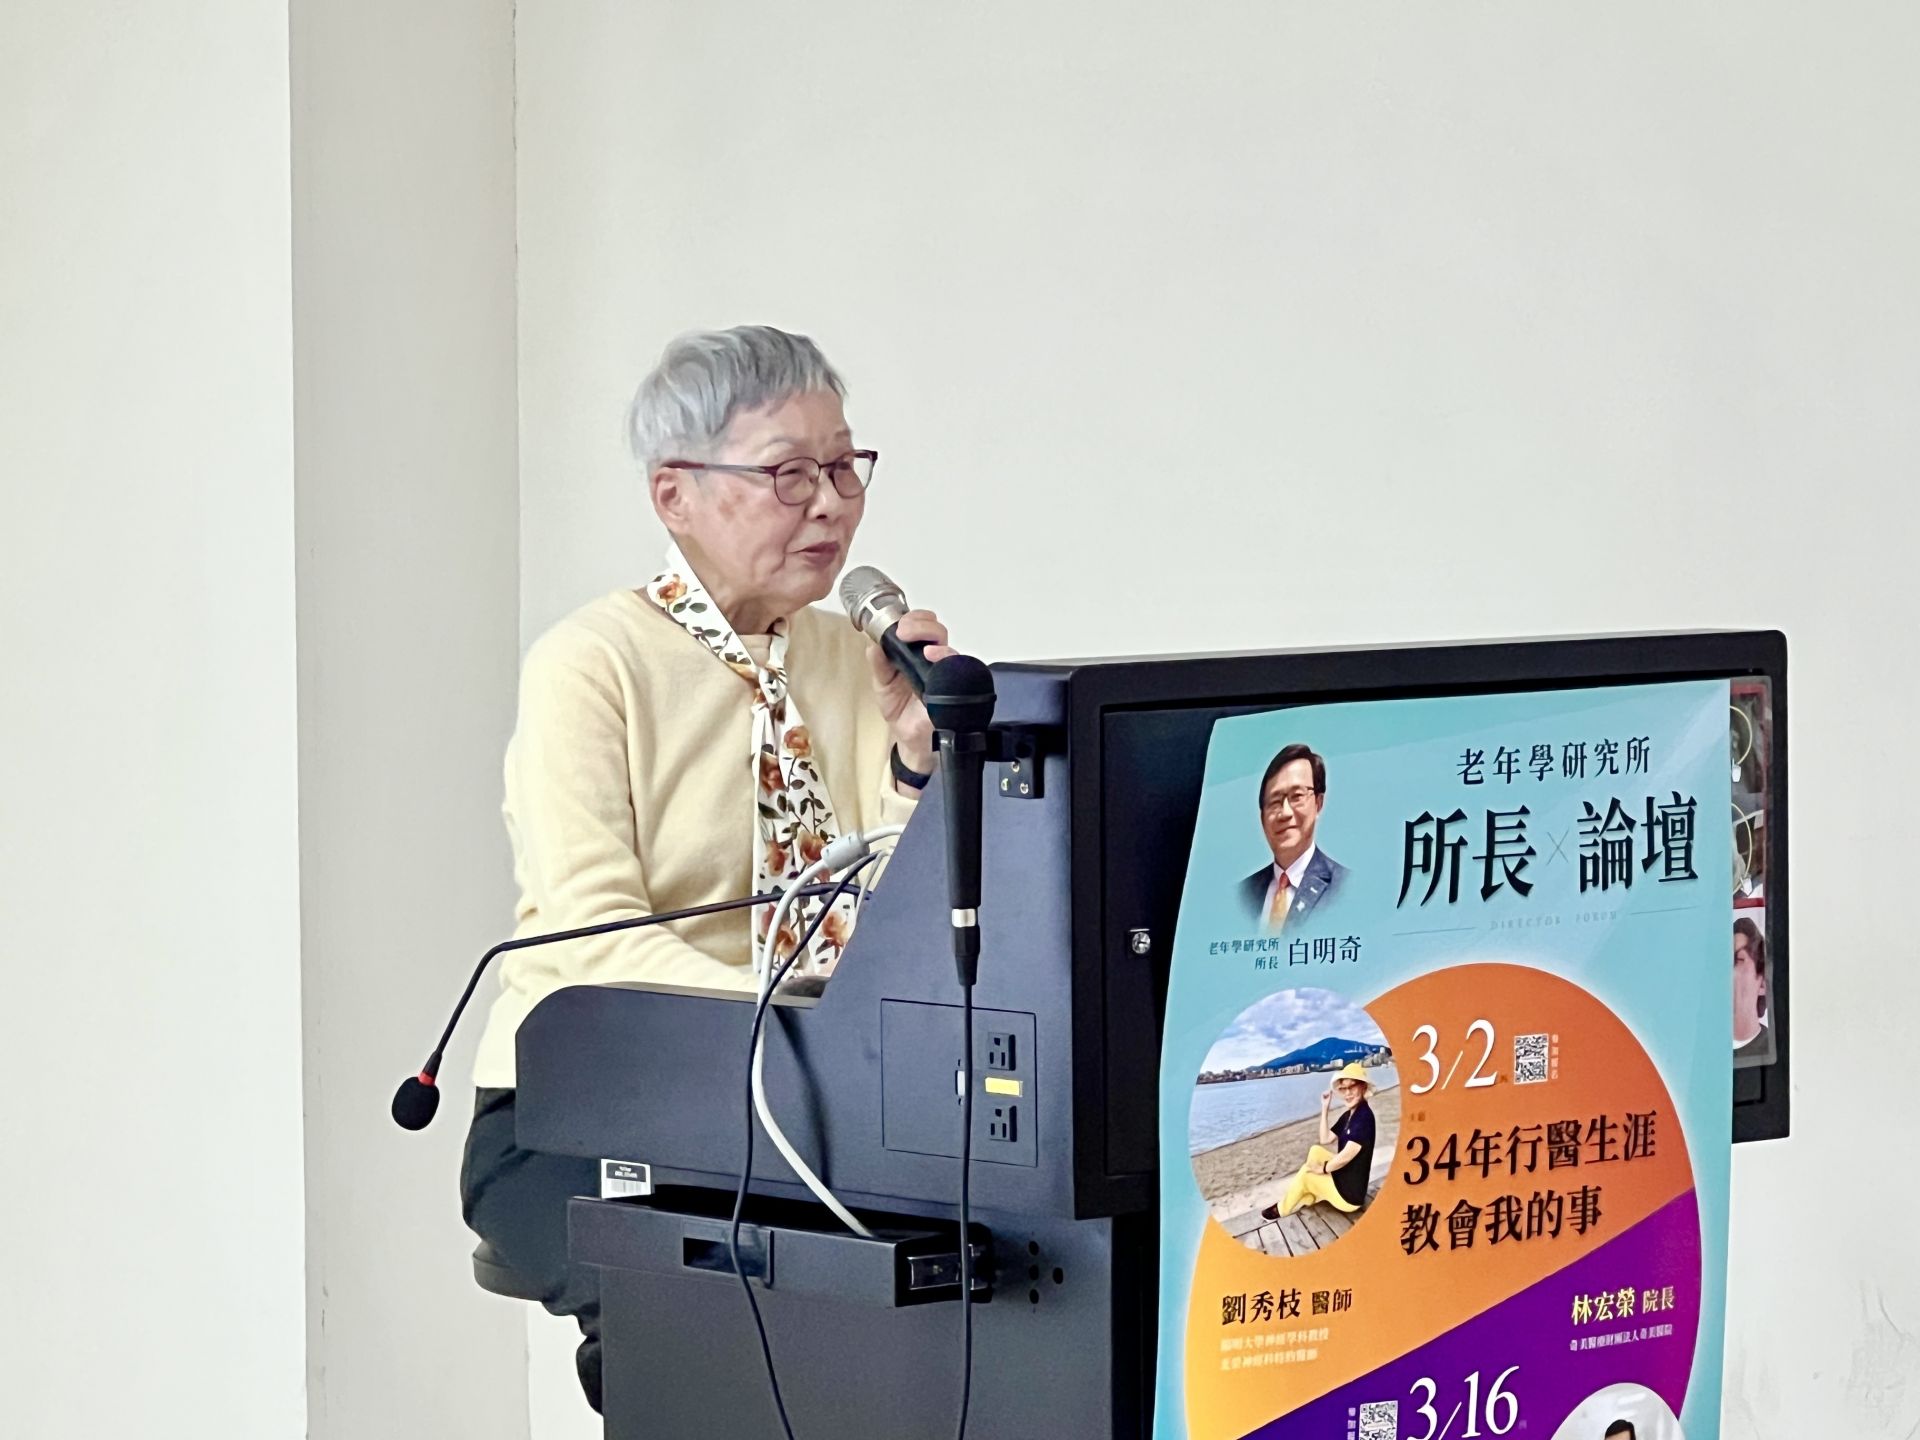 Director's Forum on Gerontology: Prevention is the Best Treatment - Dr. Xiu-Zhi Liu Discusses Dementia and Care for the Elderly